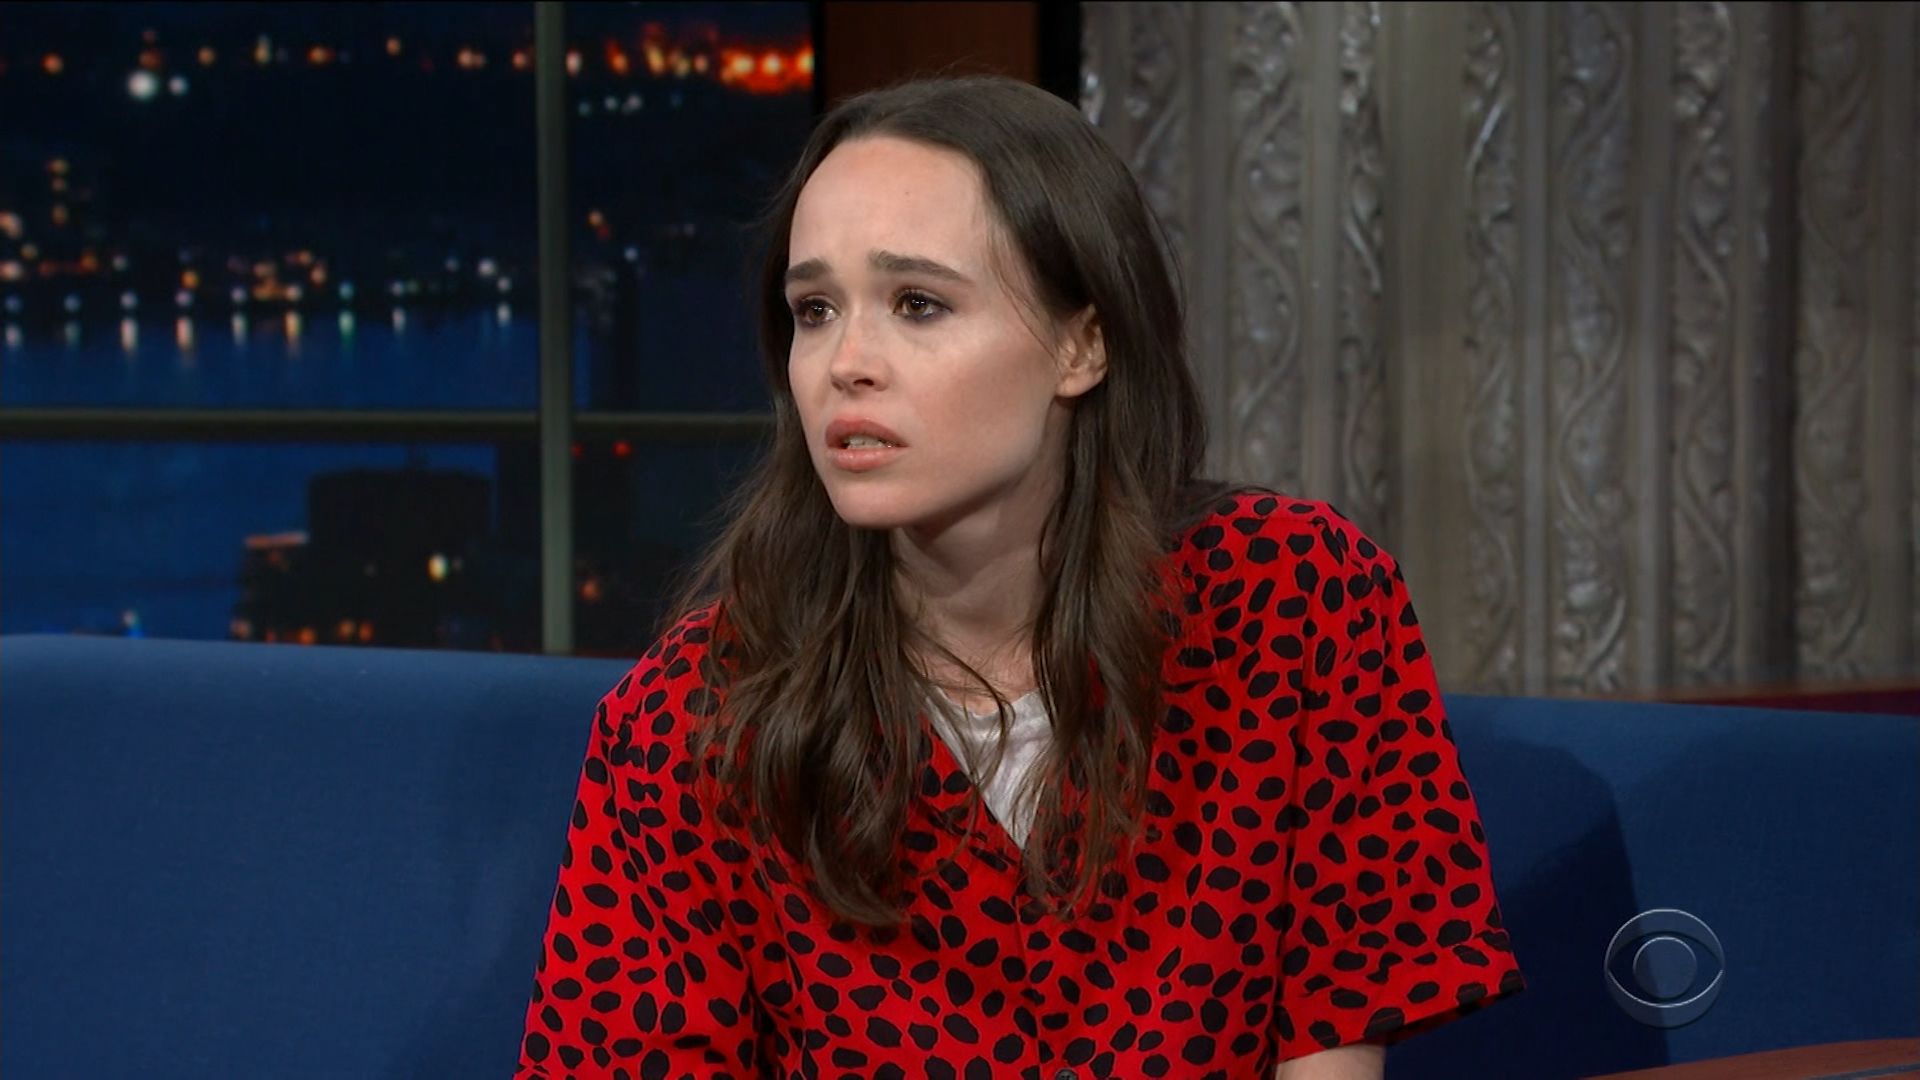 arielle barnes recommends ellen page poses topless pic